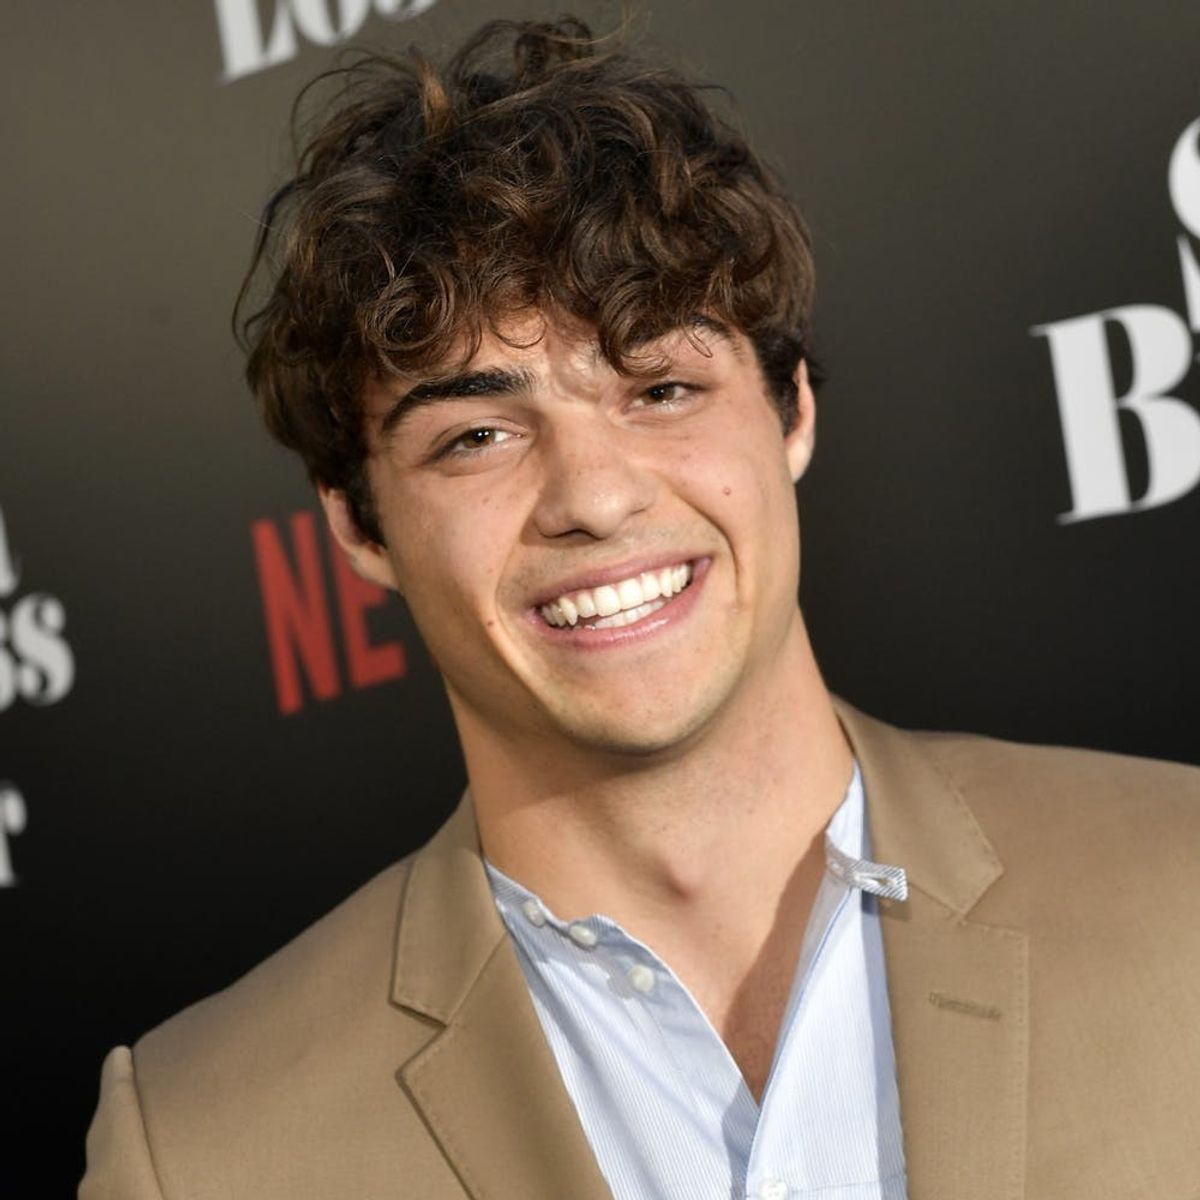 Noah Centineo Talks About the Possibility of a ‘To All the Boys I’ve Loved Before’ Sequel